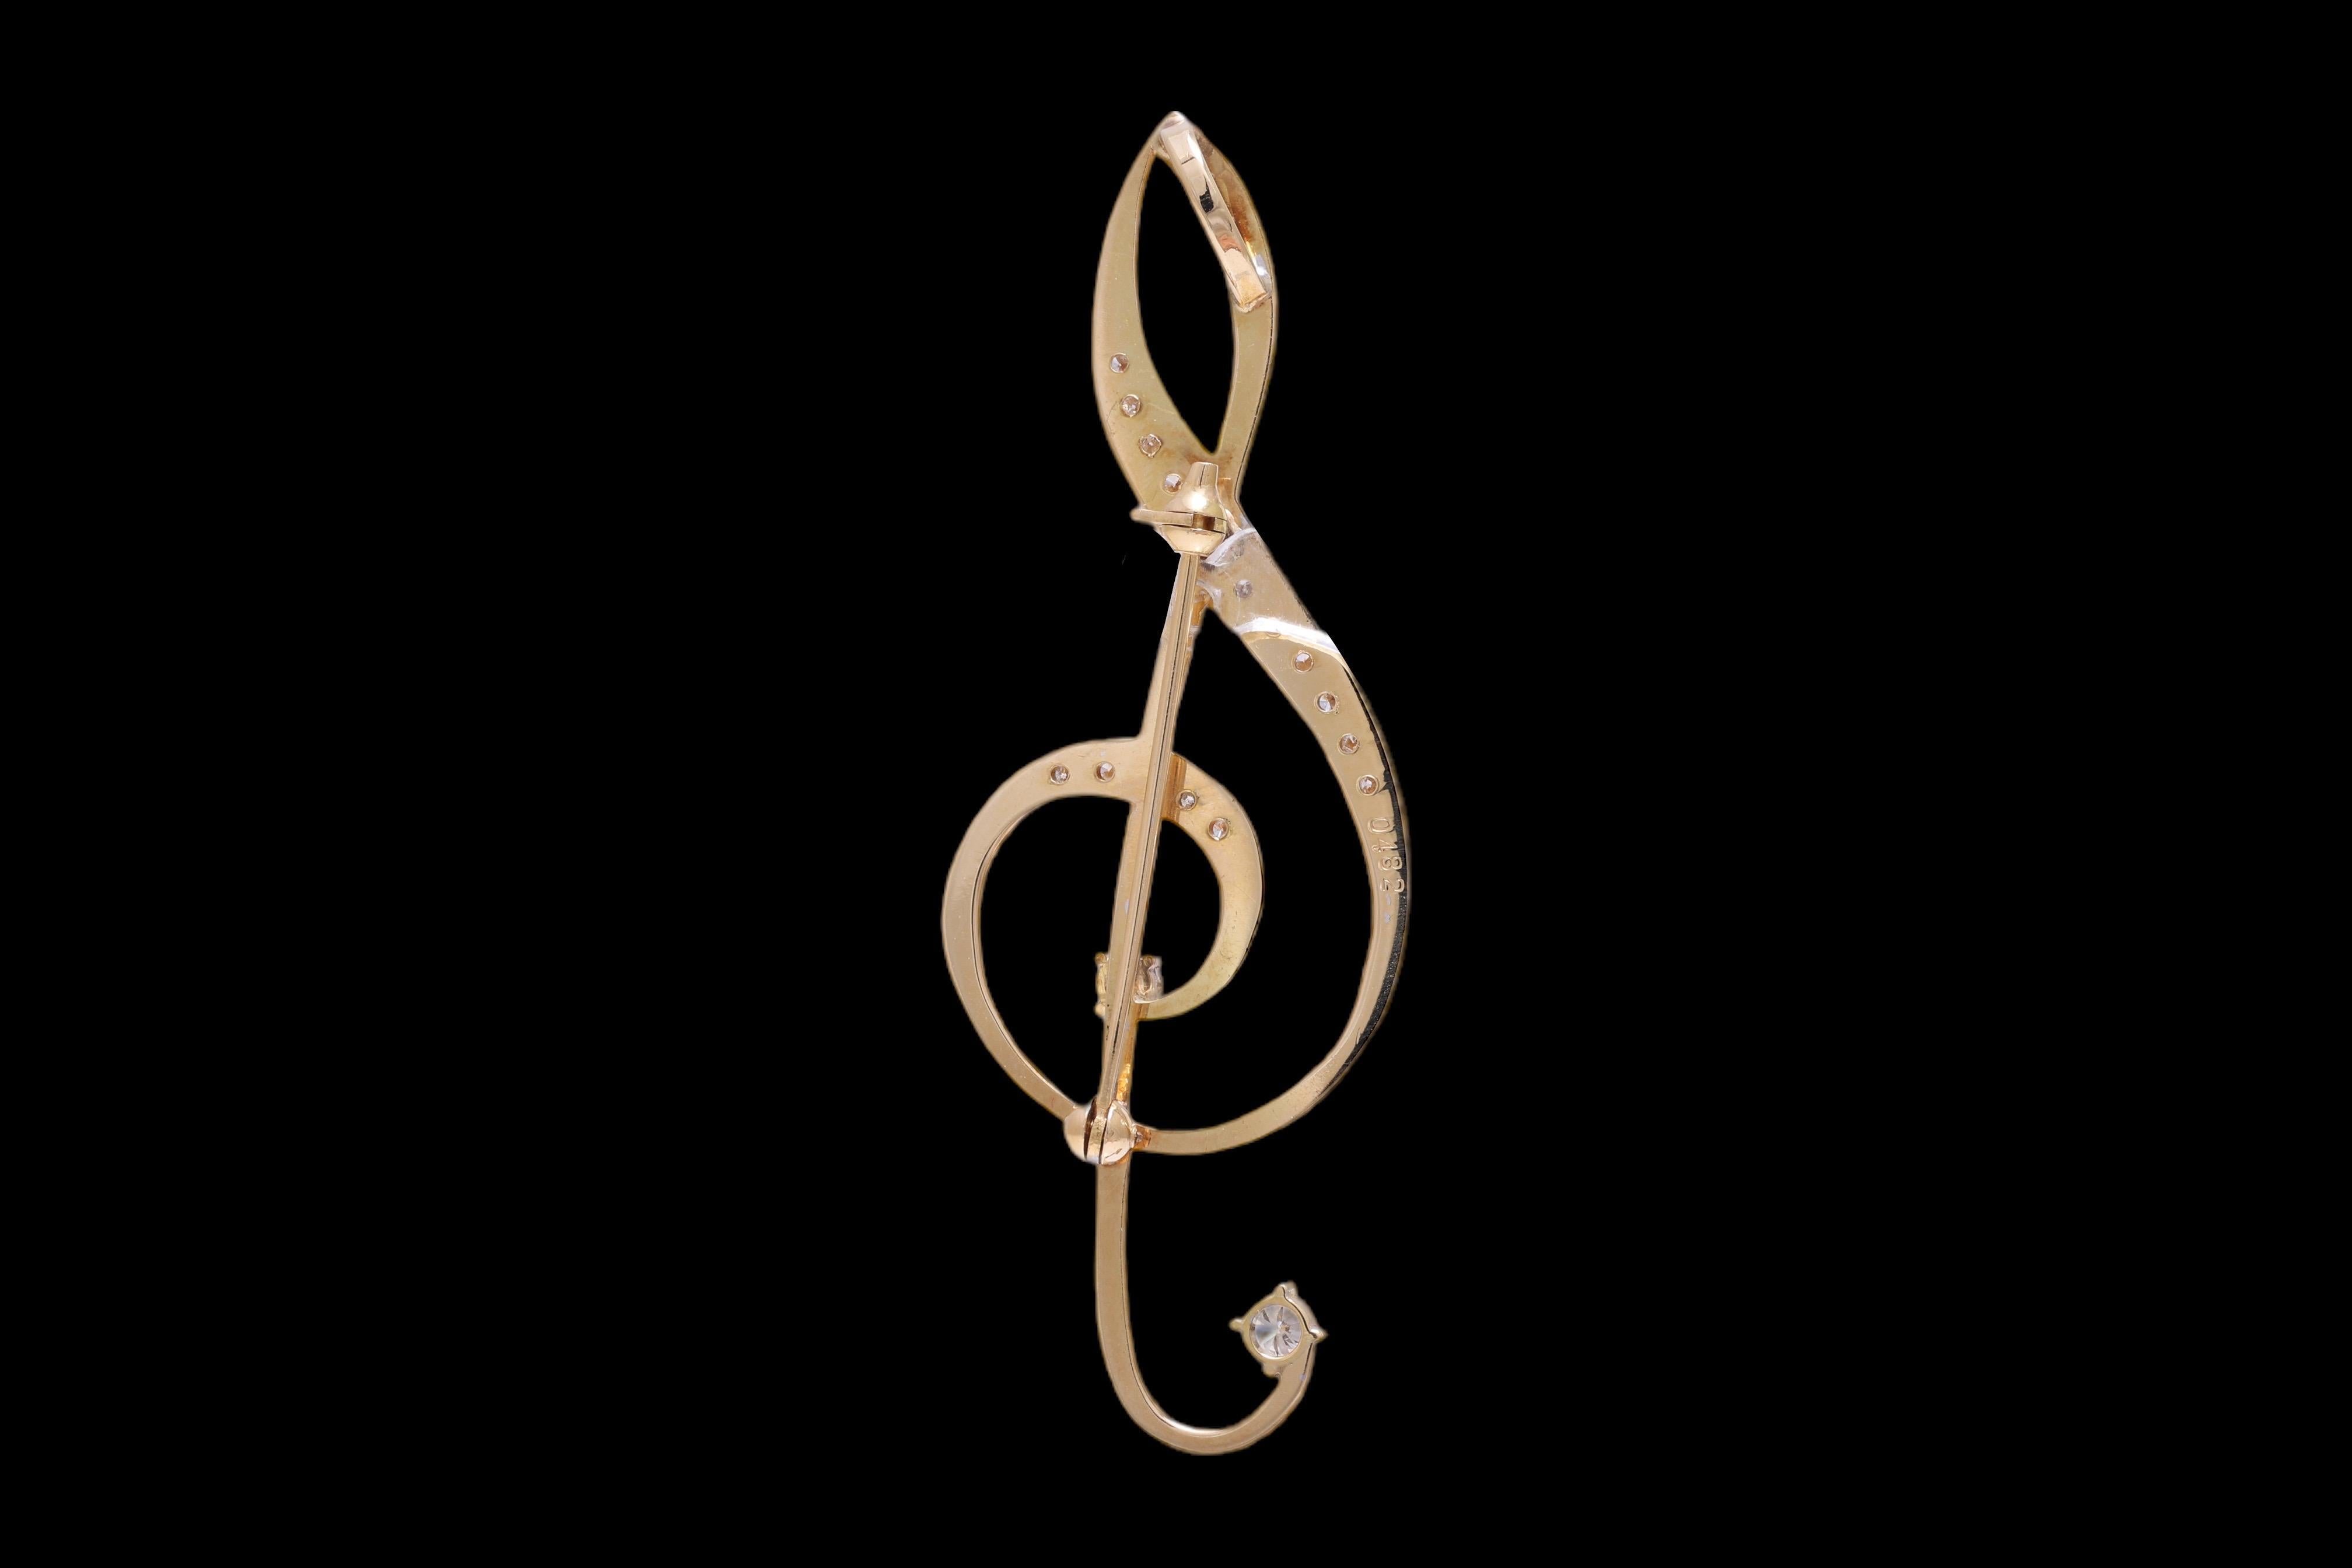 18 kt Yellow Gold Music Note Shape Brooch / Pendent-Hanger  0.48 Ct Diamonds For Sale 1